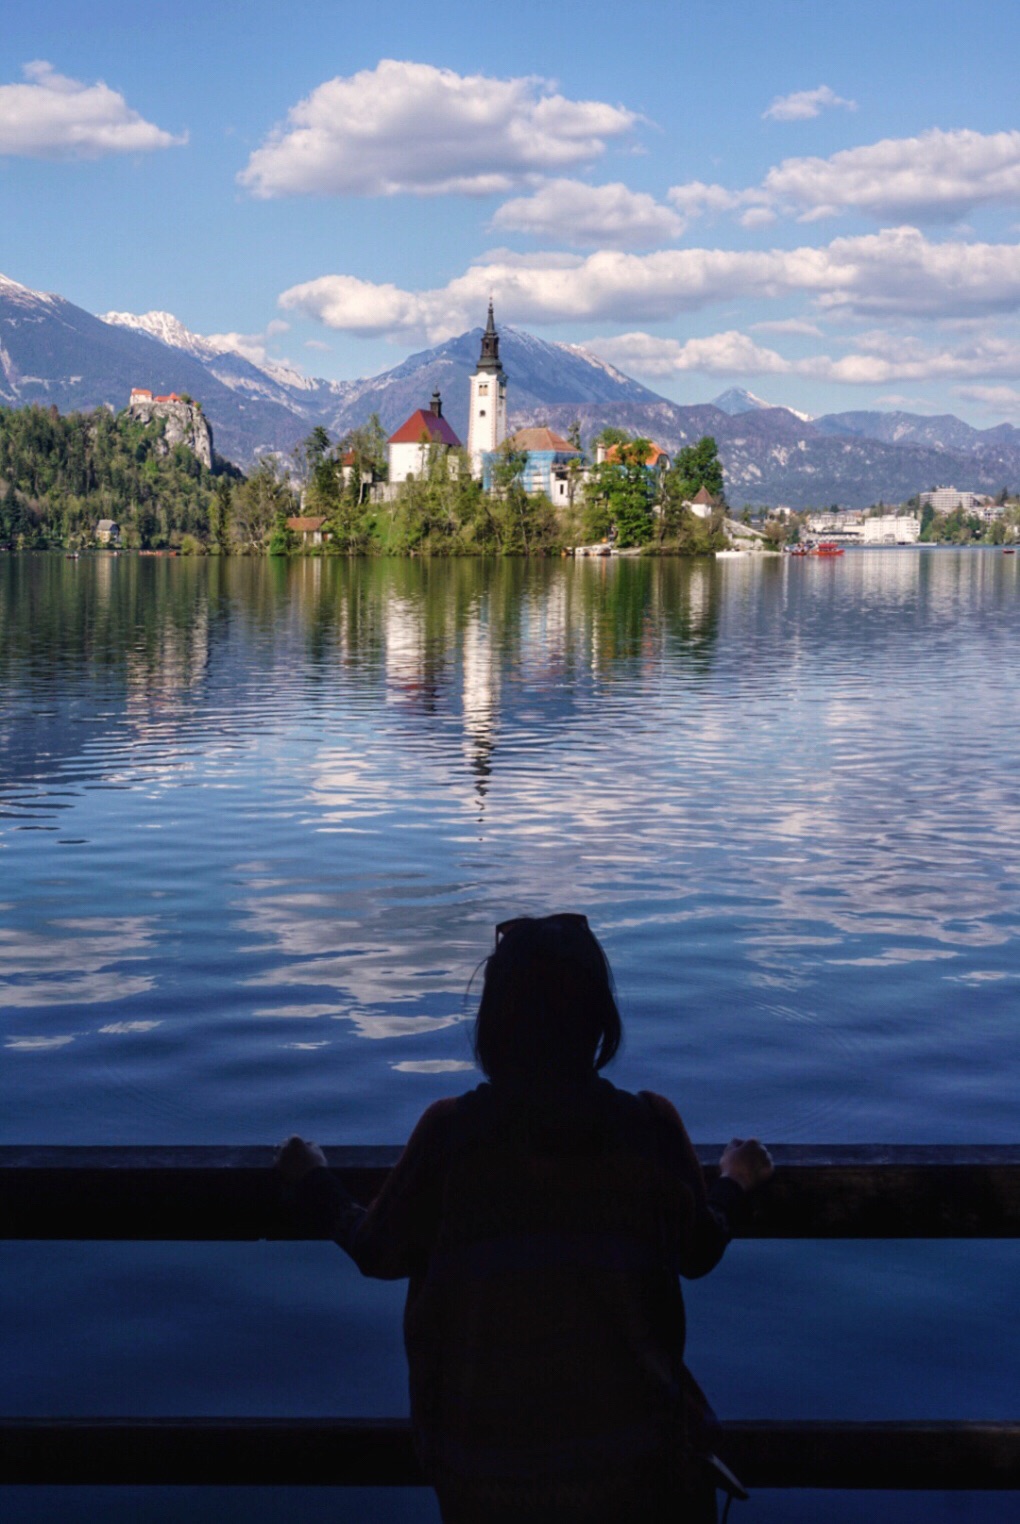 Lake Bled - A slice of Slovenian heaven - 2 Cups of Travel